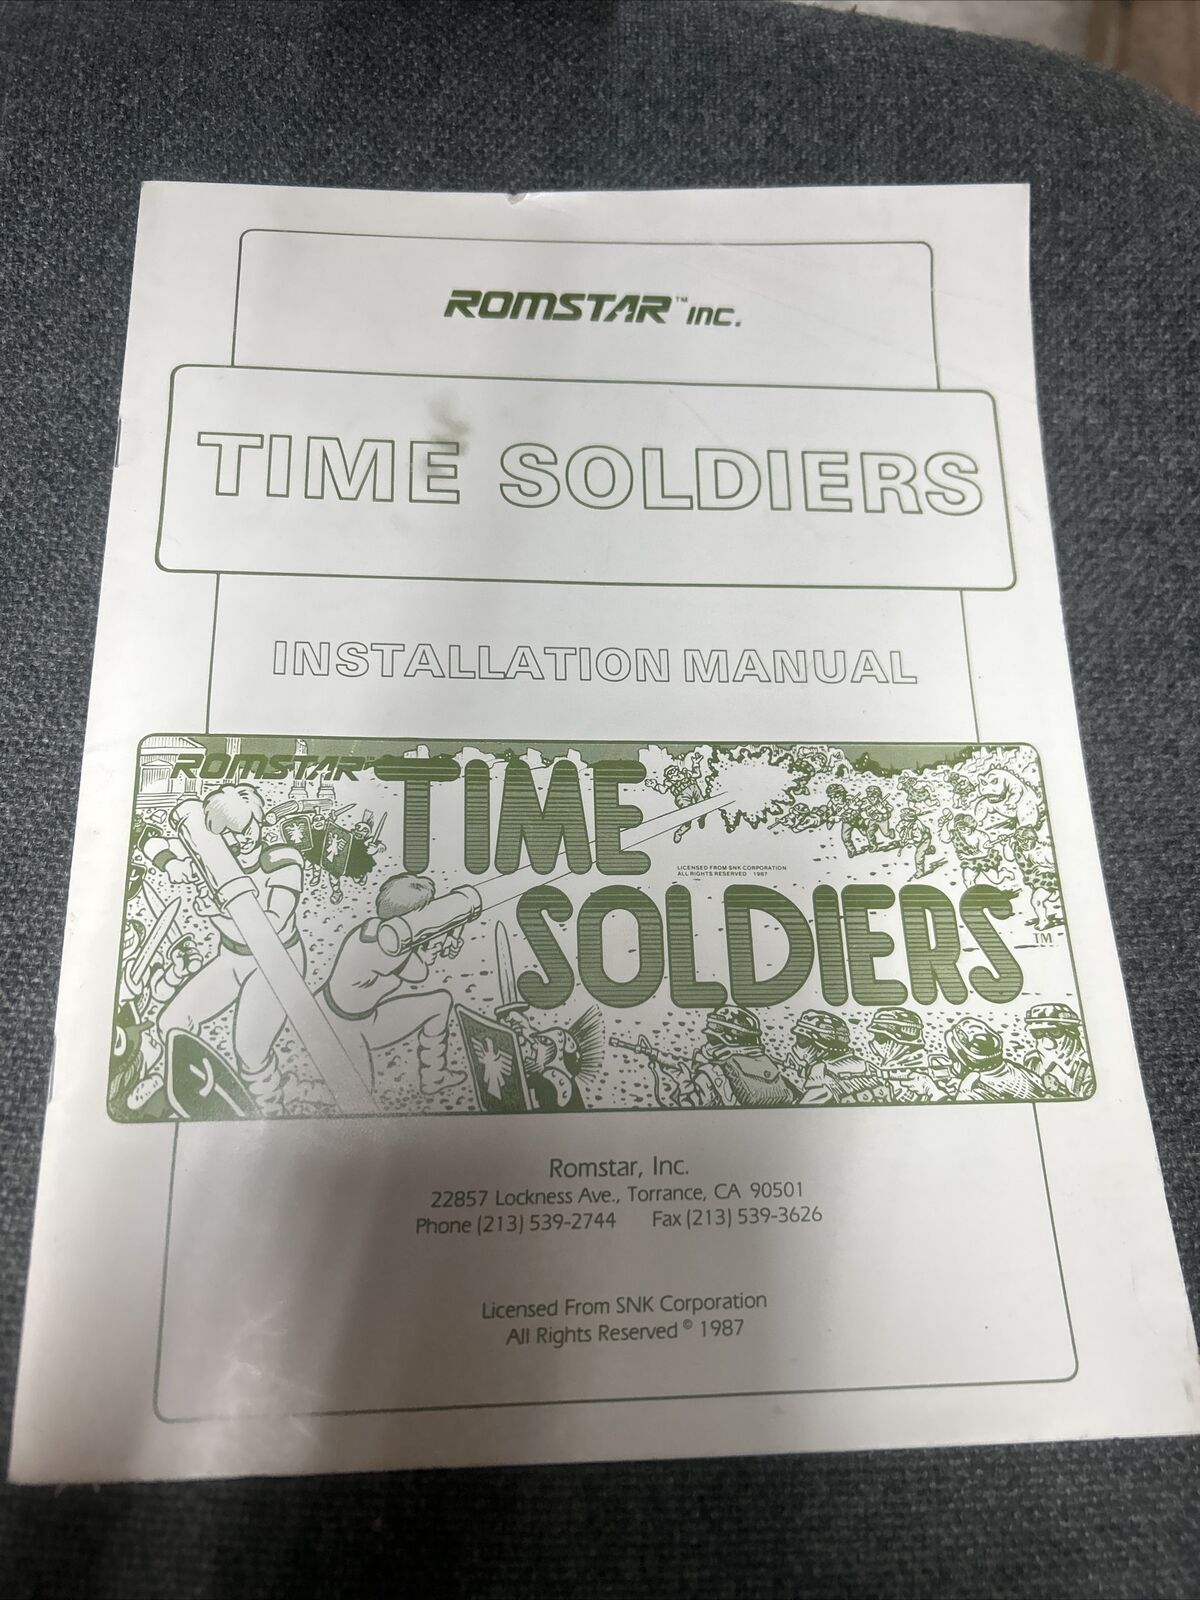 Romstar TIME SOLDIERS Arcade Video Game Manual - good used original